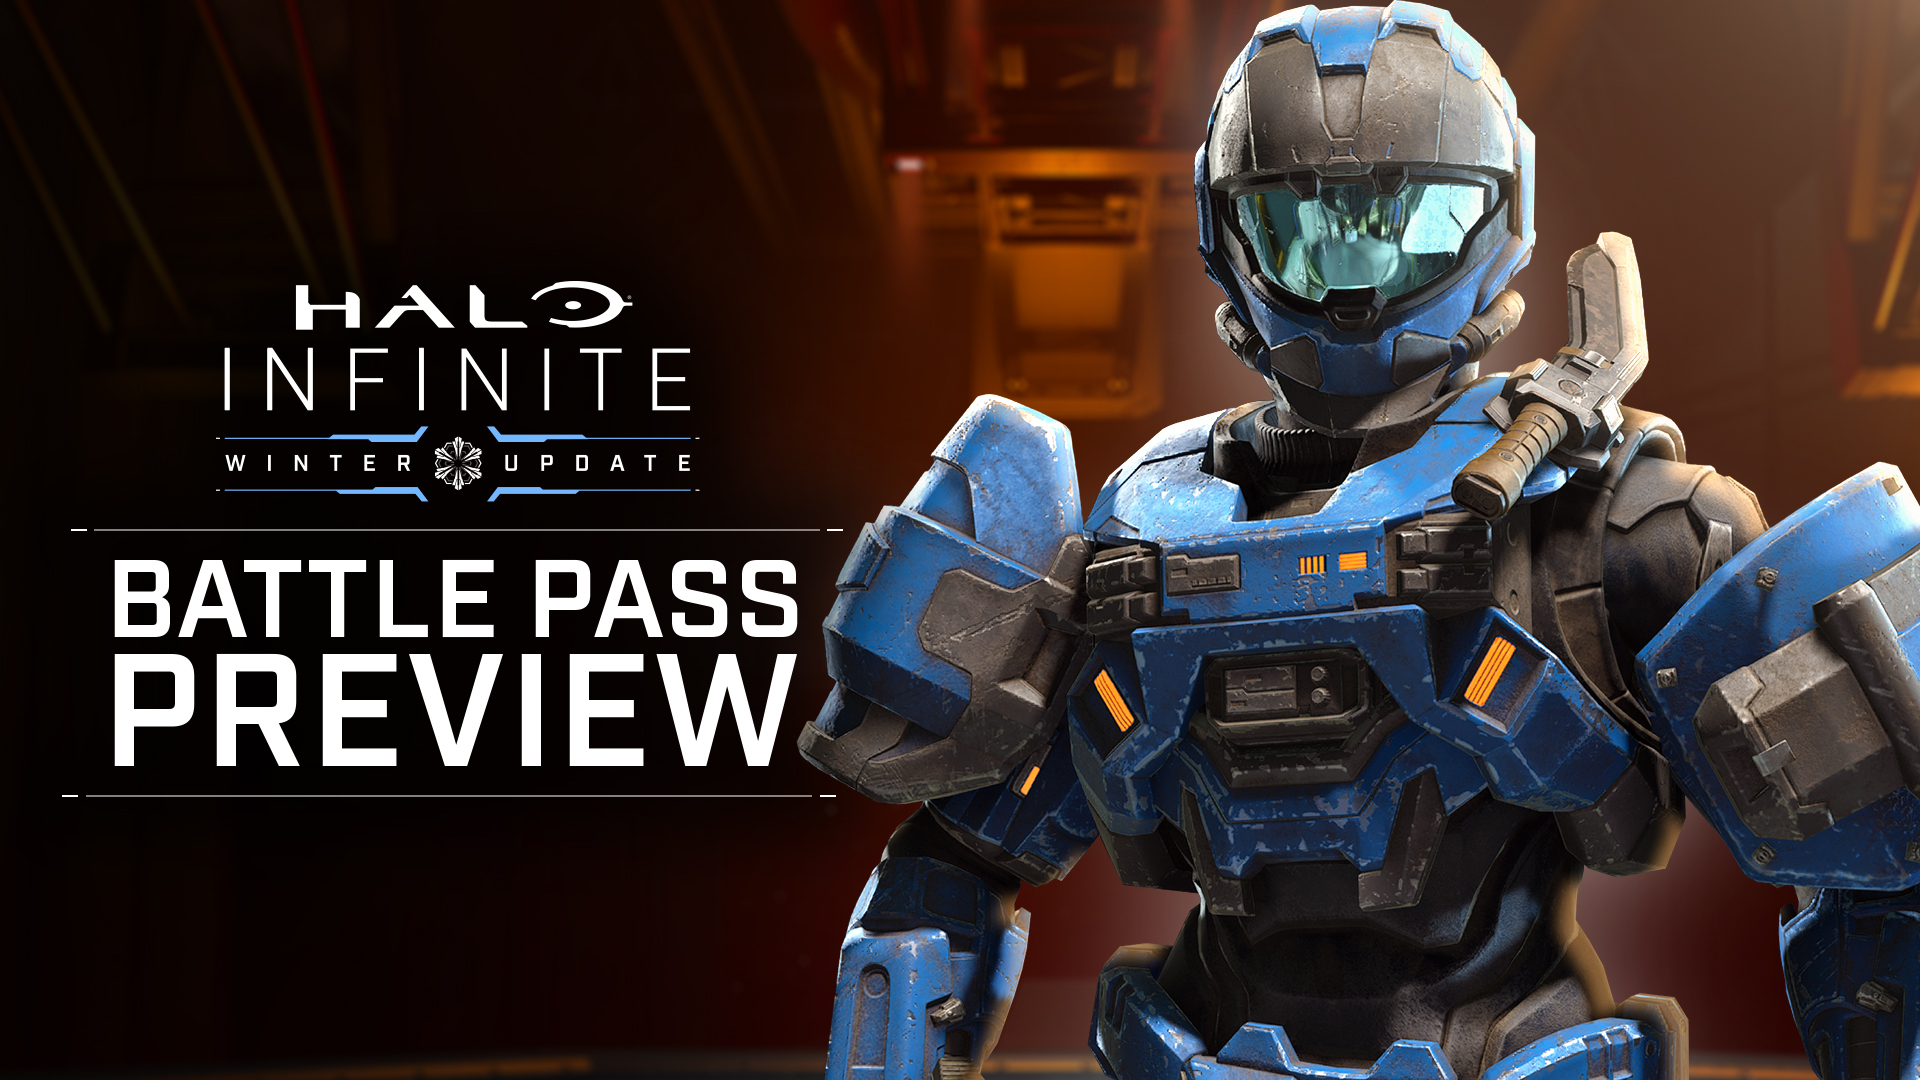 Header image for the Winter Update Battle Pass showing a Spartan with a CQC helmet